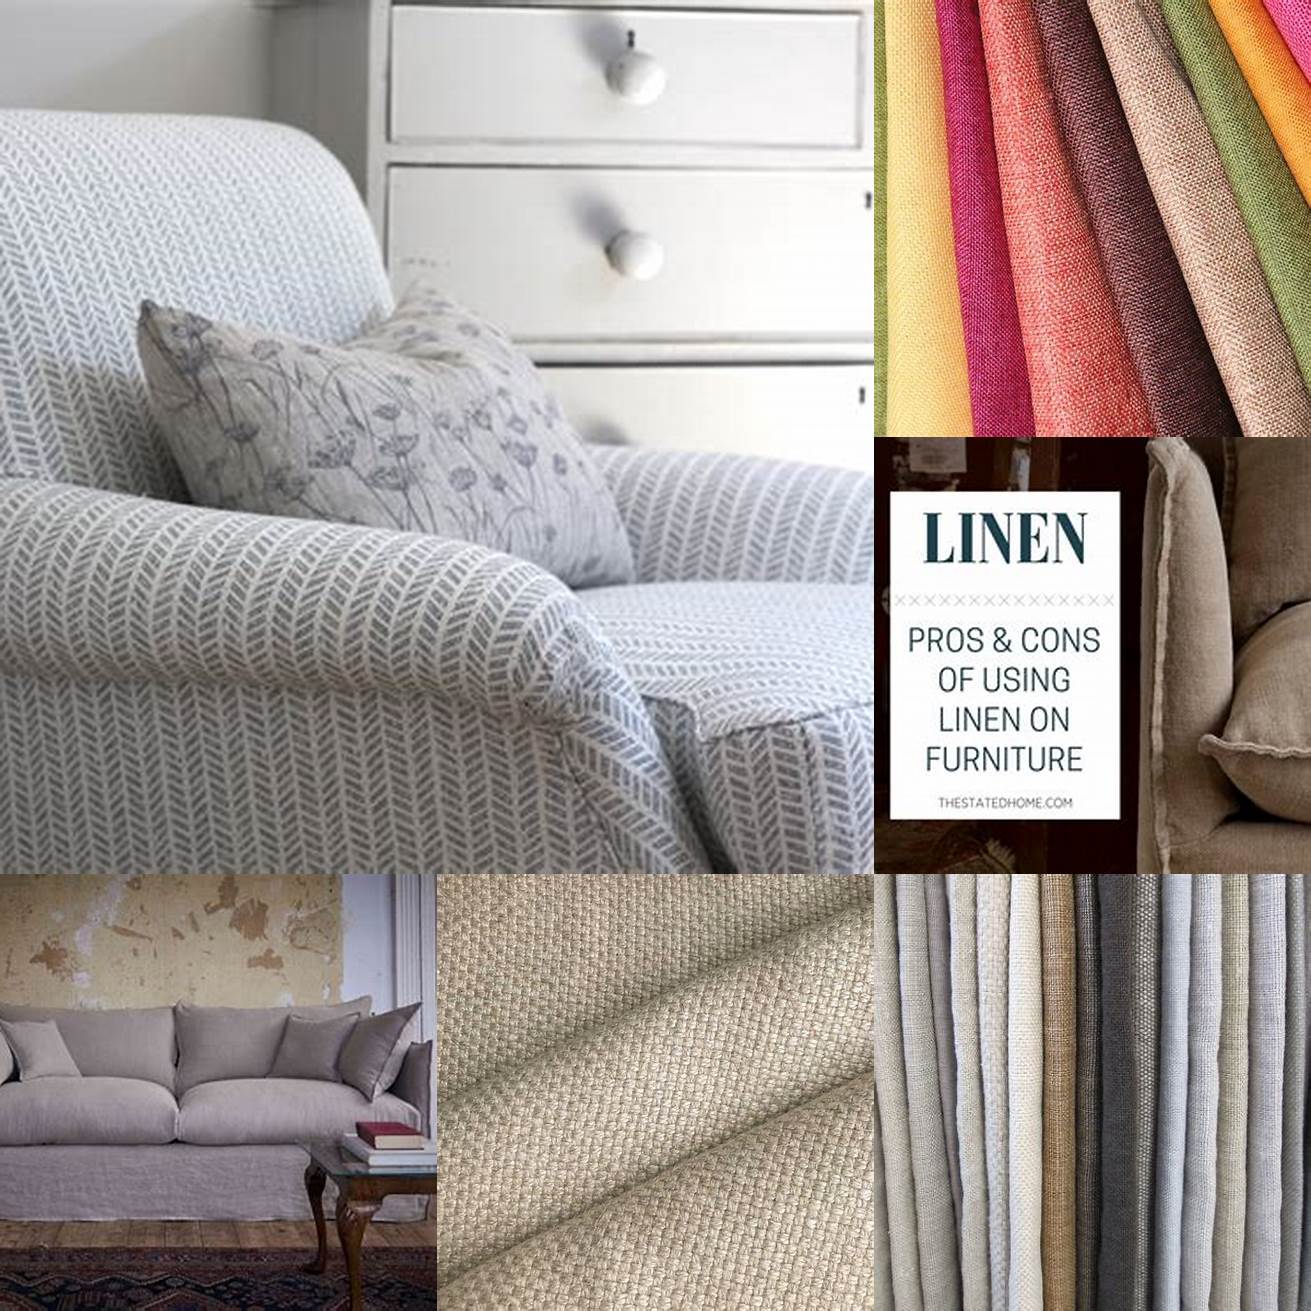 Linen - Linen upholstery is lightweight and breathable making it a good choice for those who live in warmer climates